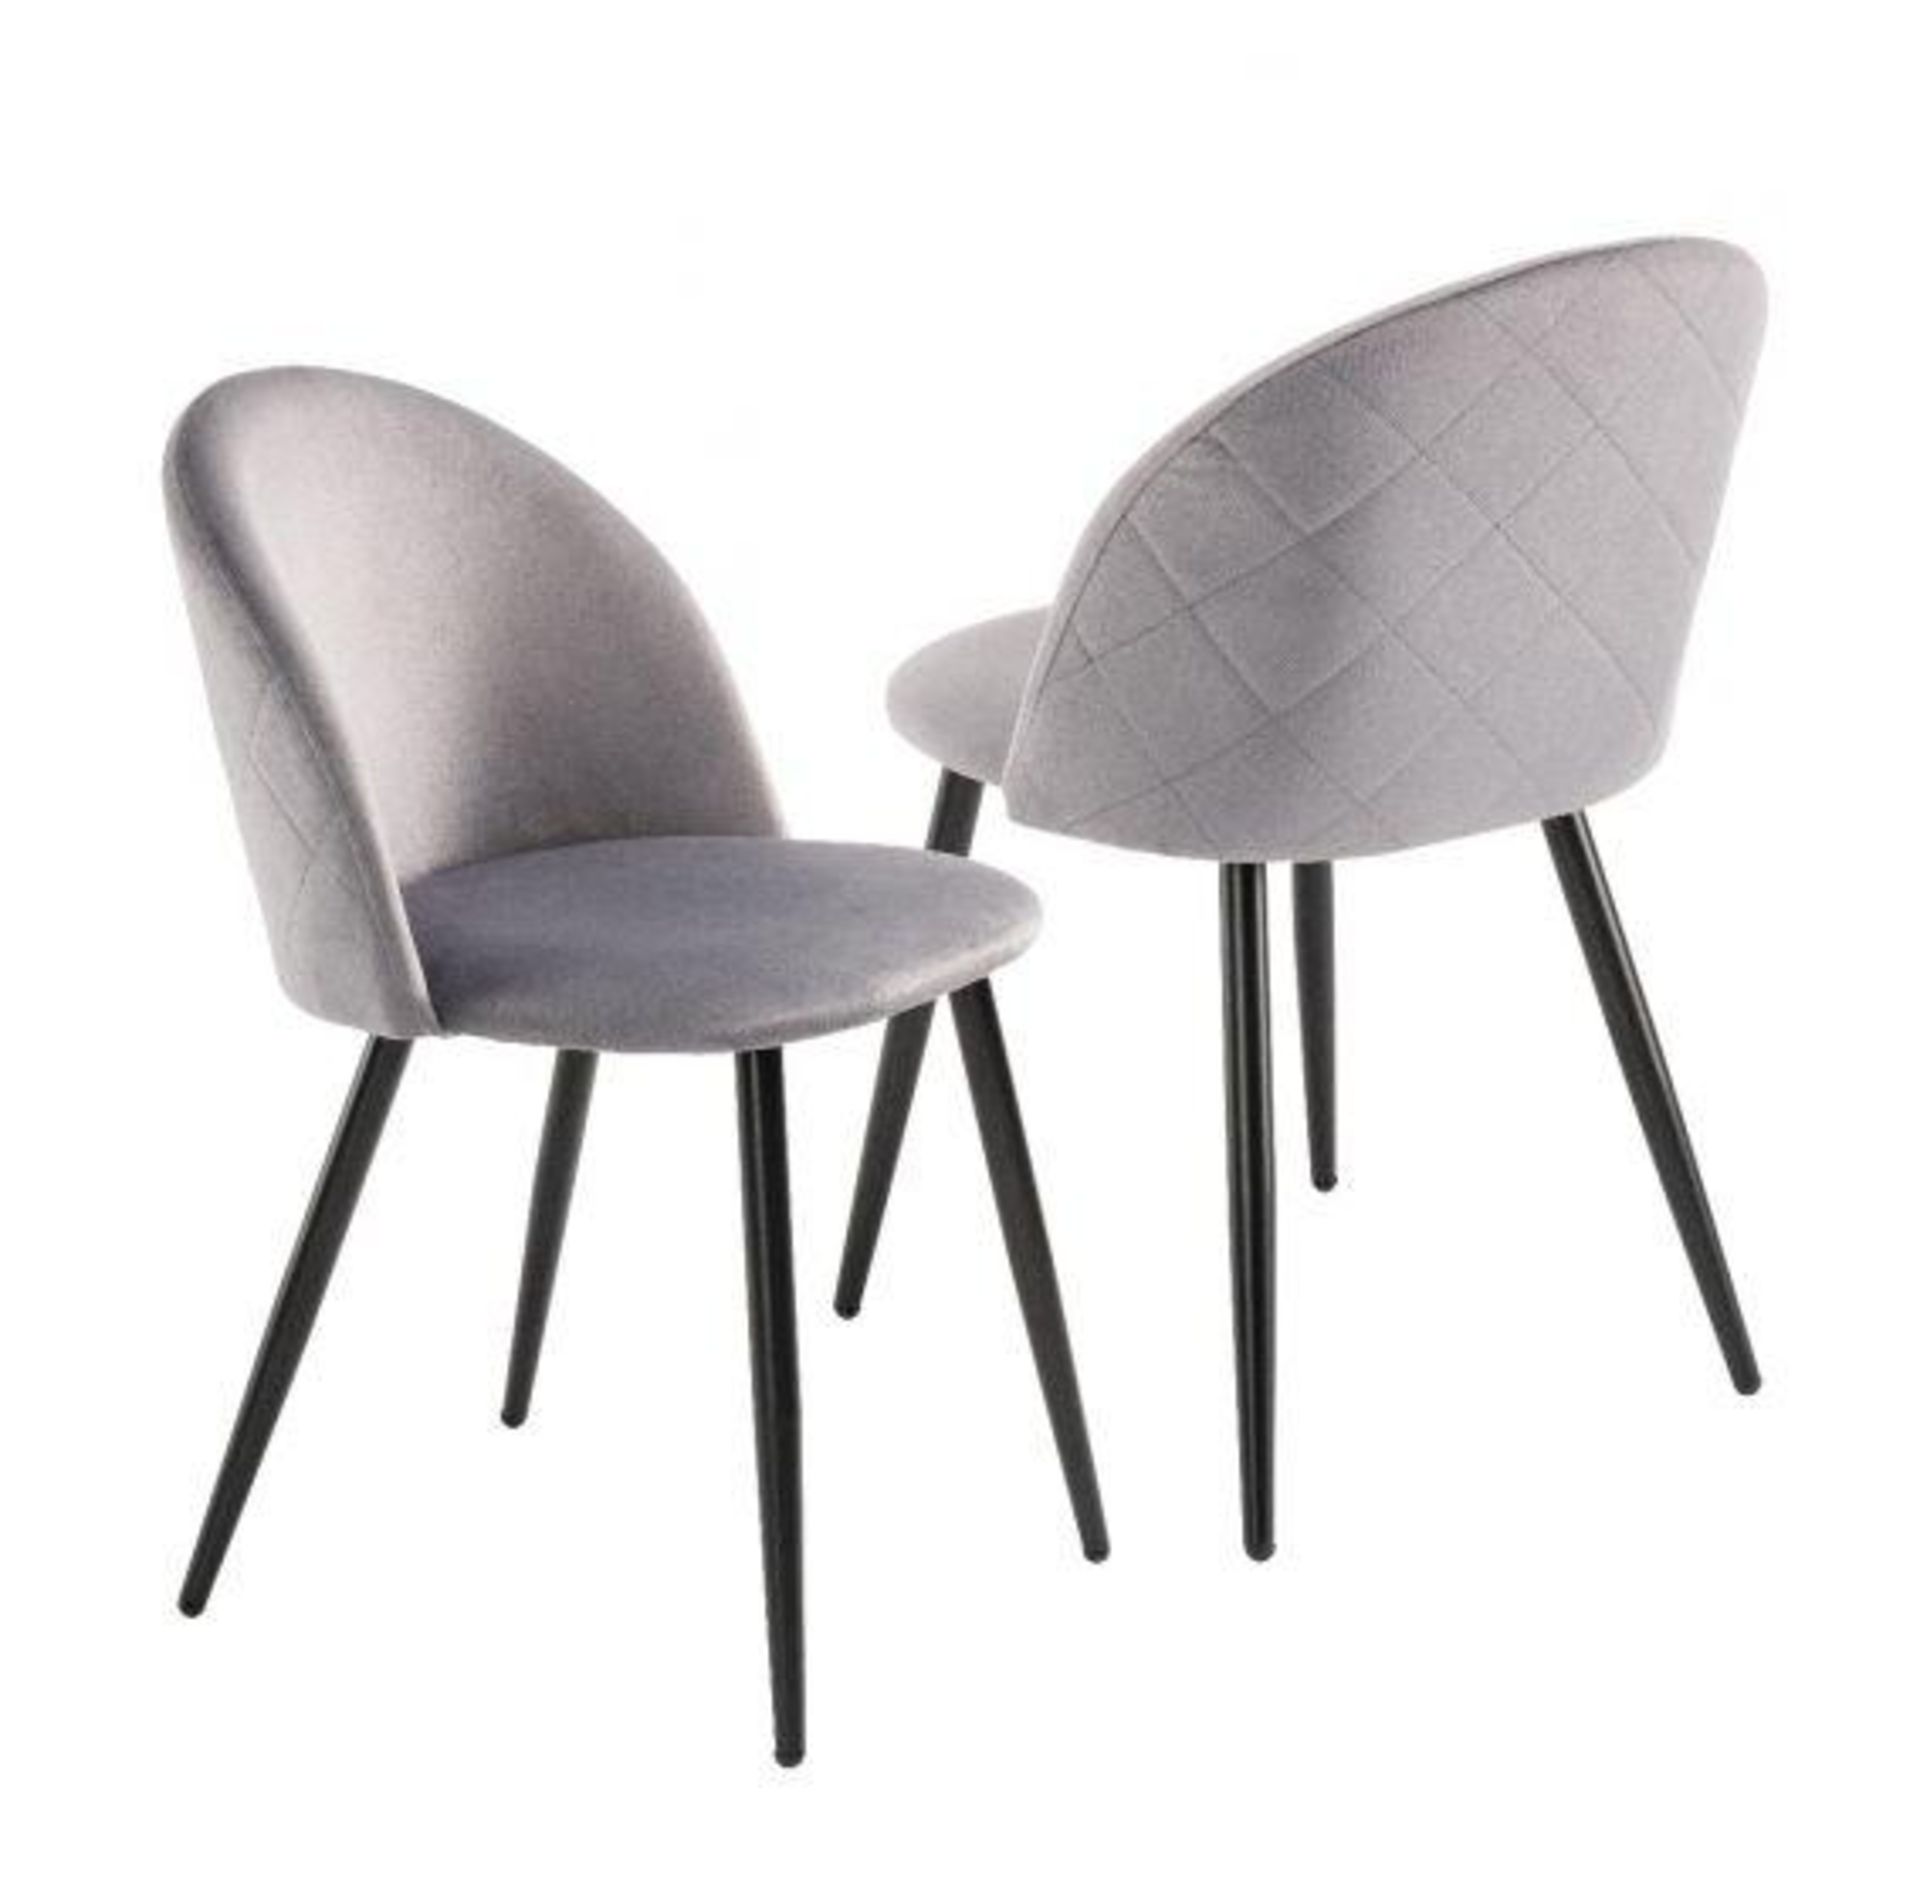 RRP £200 - Boxed 2 'Lotus' Black Dining Chairs